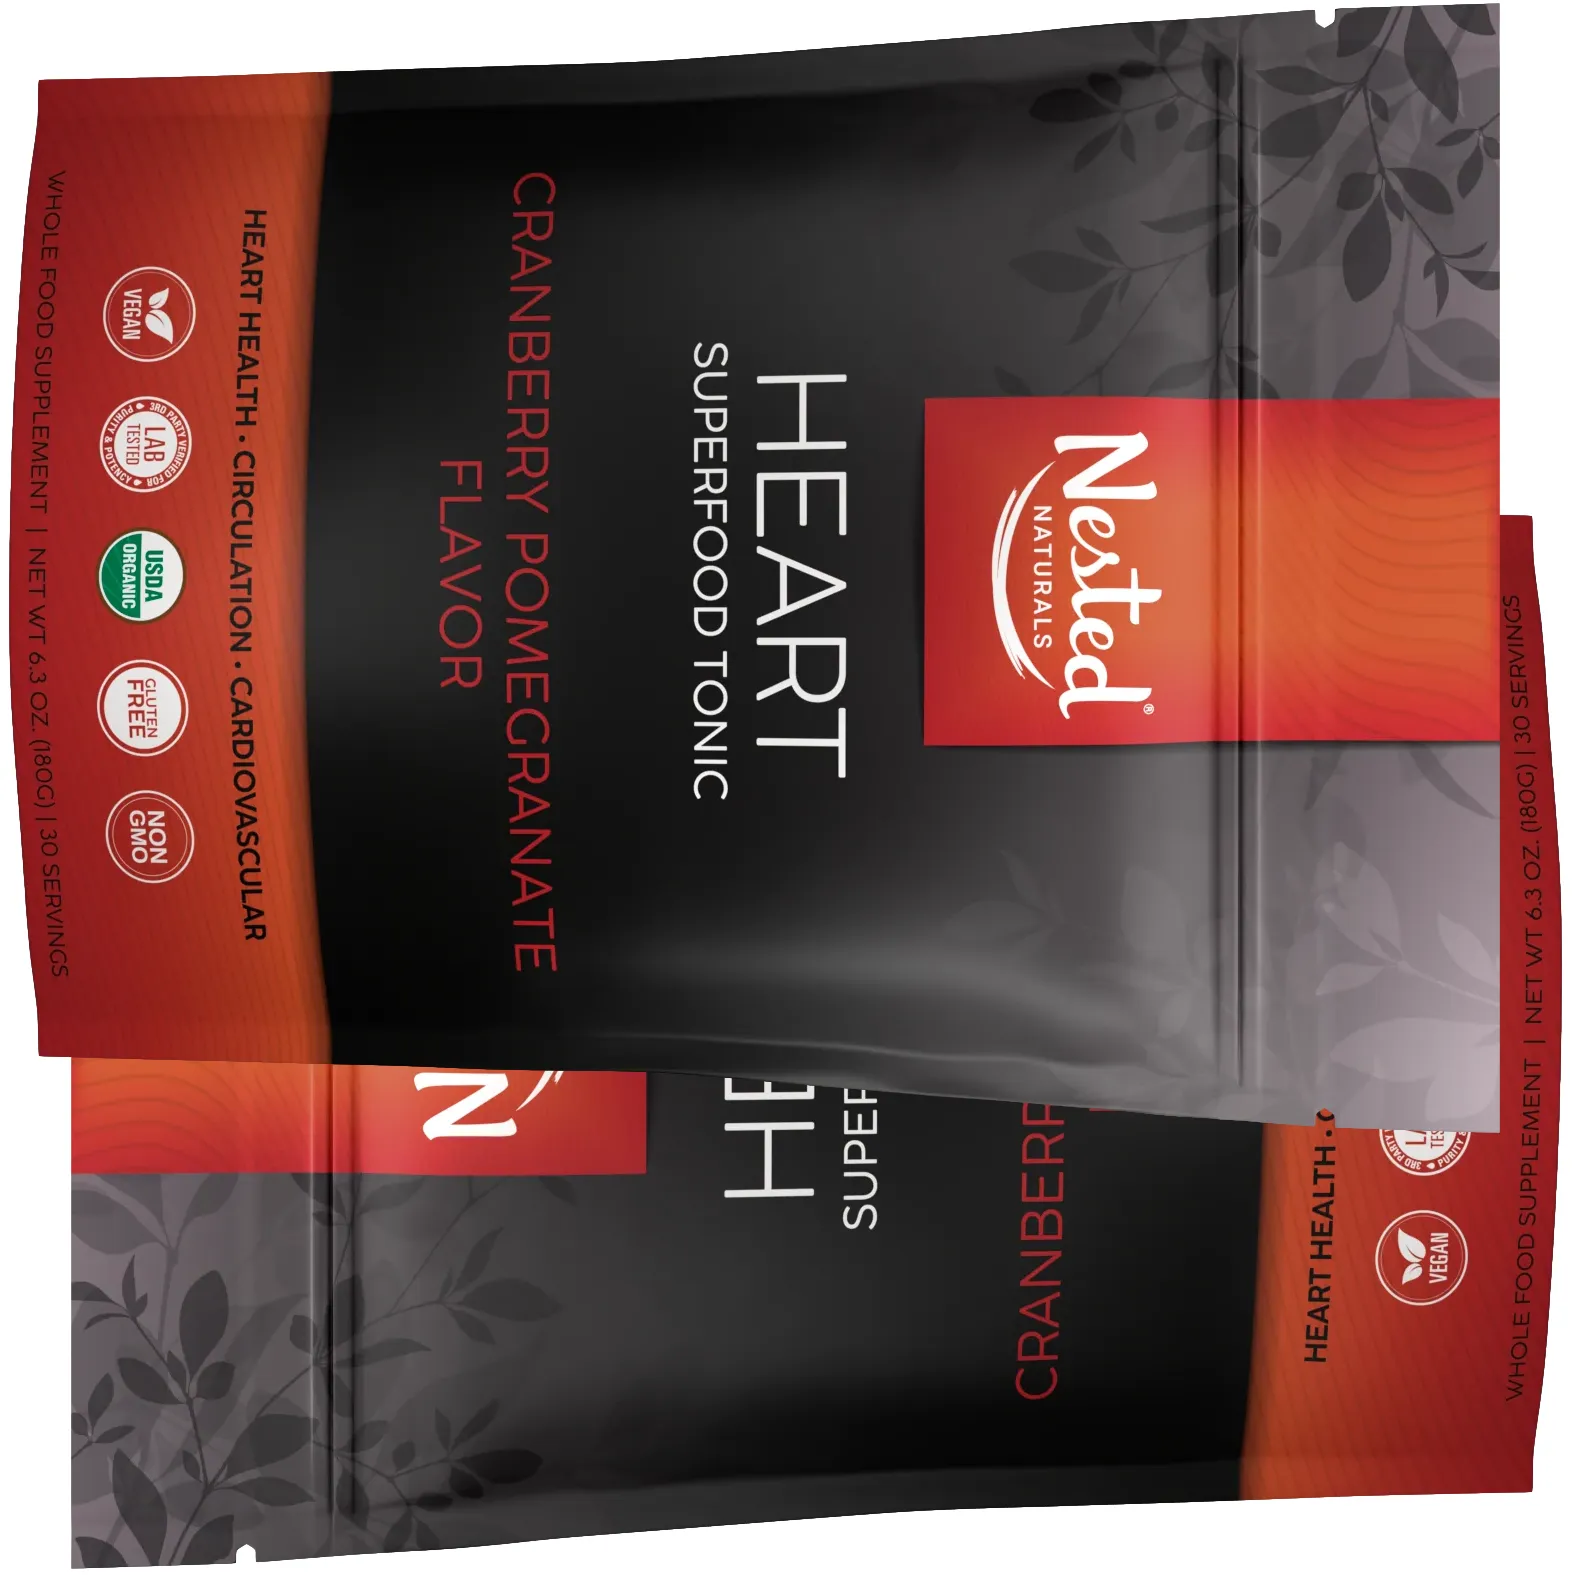 Free Nested Naturals Heart Superfood Tonic Health Drink Mix